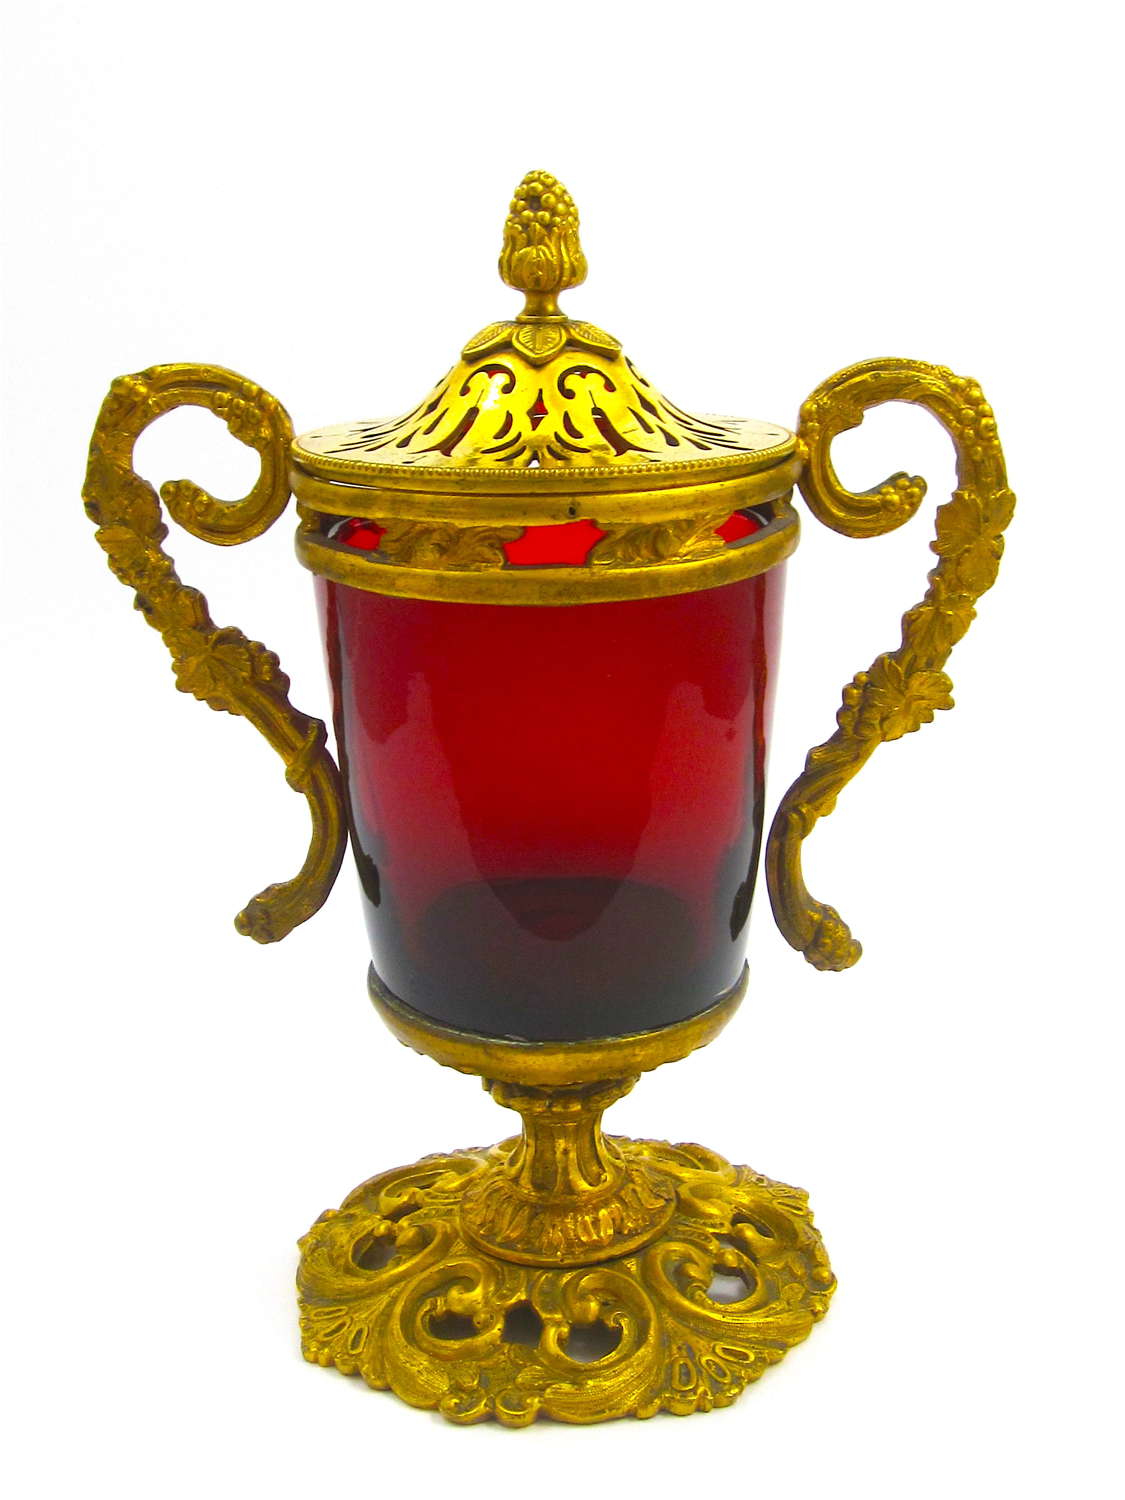 Antique French Ruby Red Baluster-Shaped Glass Vase and Cover